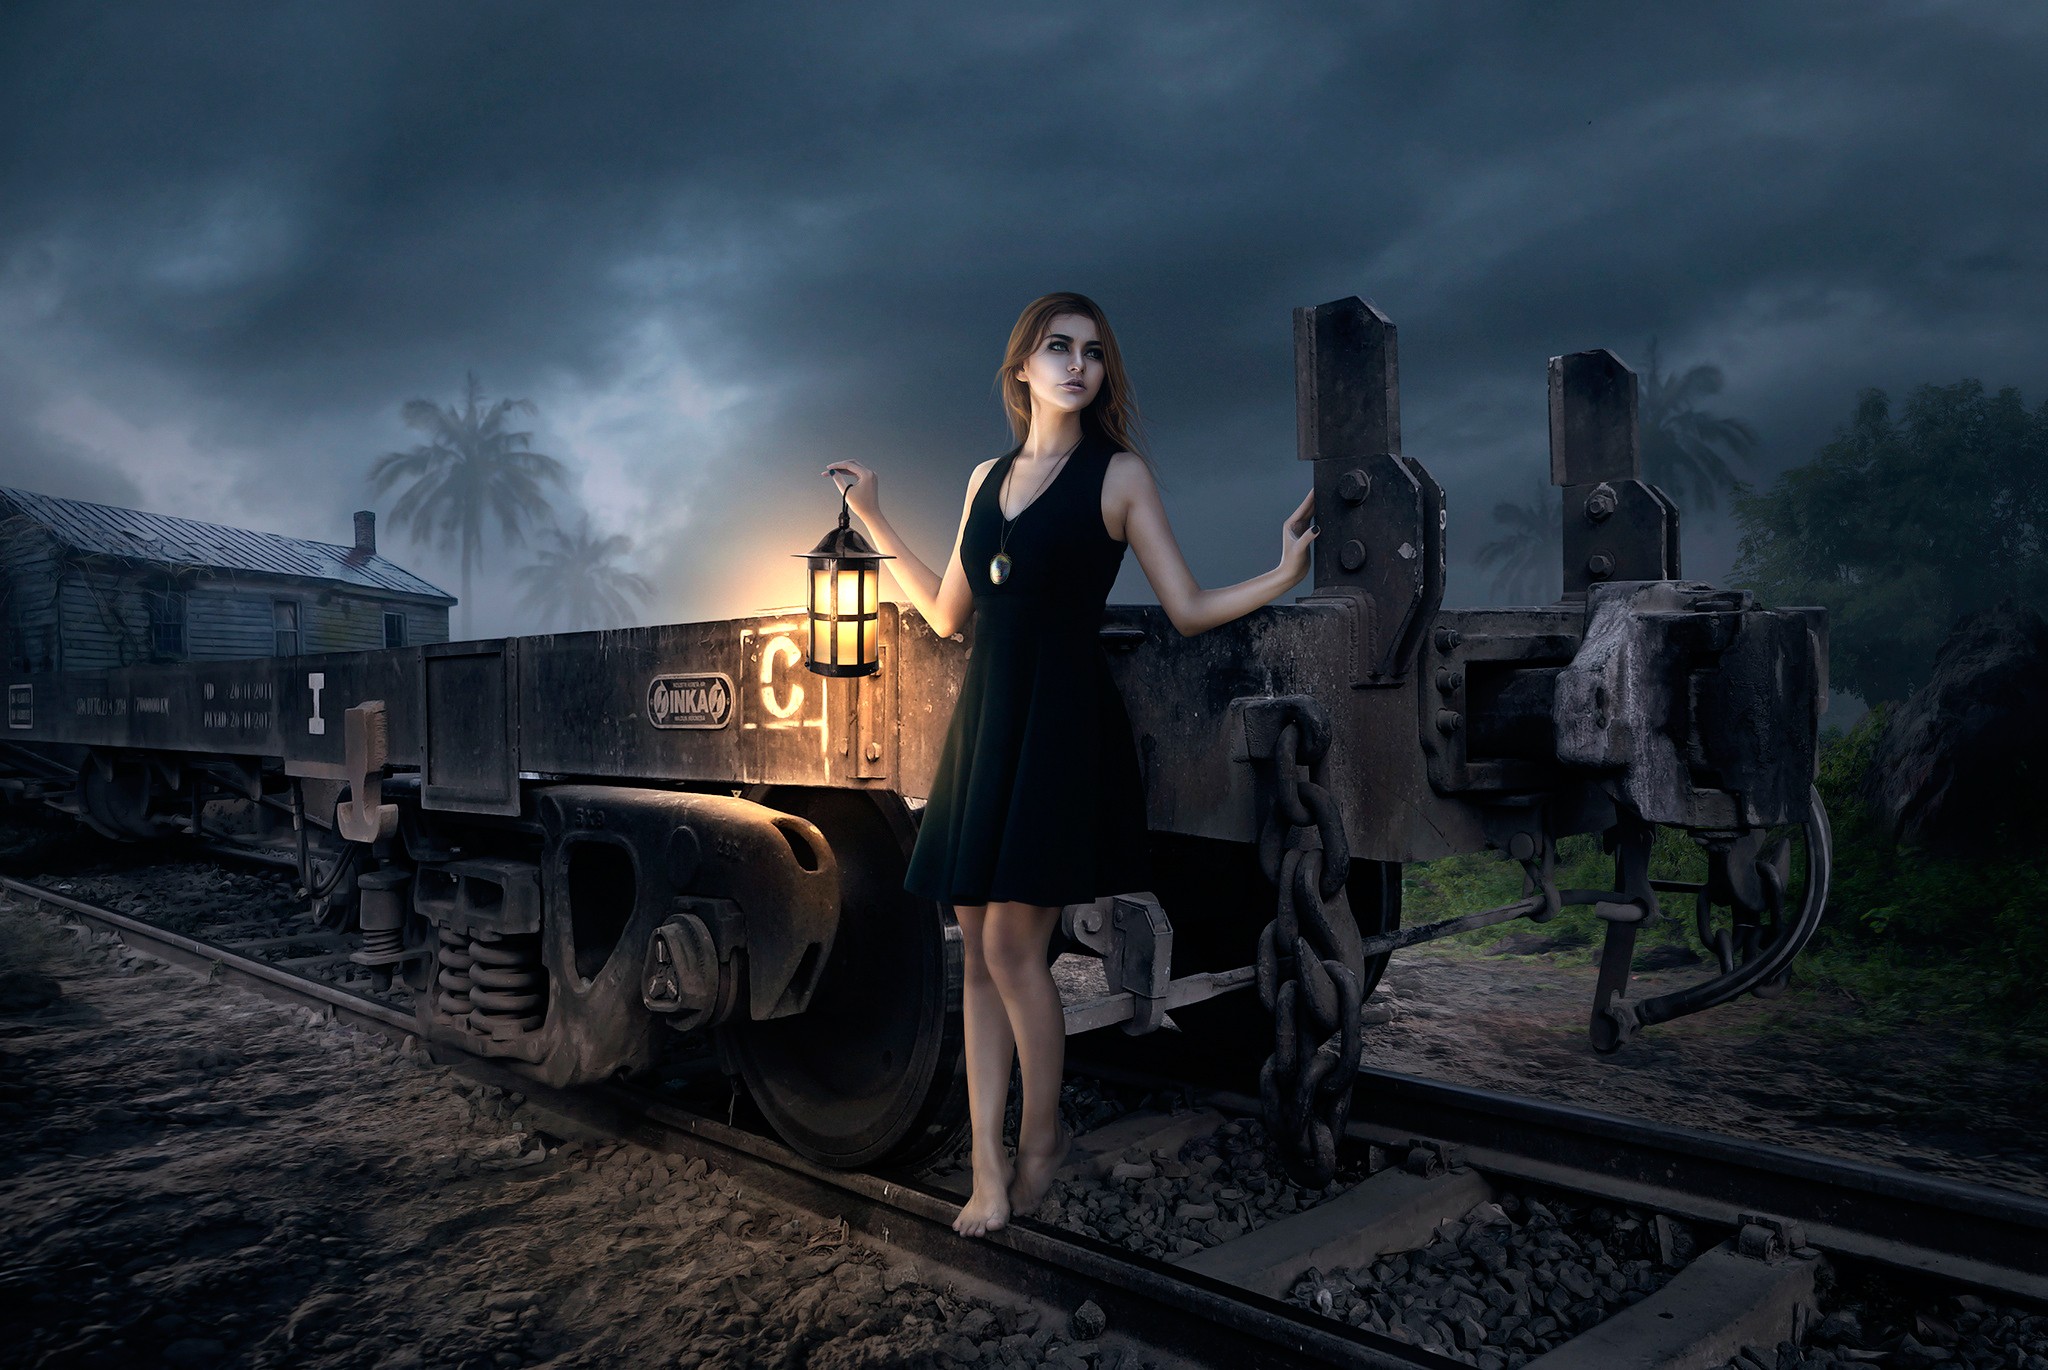 General 2048x1370 night model vehicle women women outdoors black clothing outdoors digital art barefoot railway lantern sky dress overcast train black dress clouds palm trees looking away parted lips long hair bare shoulders necklace